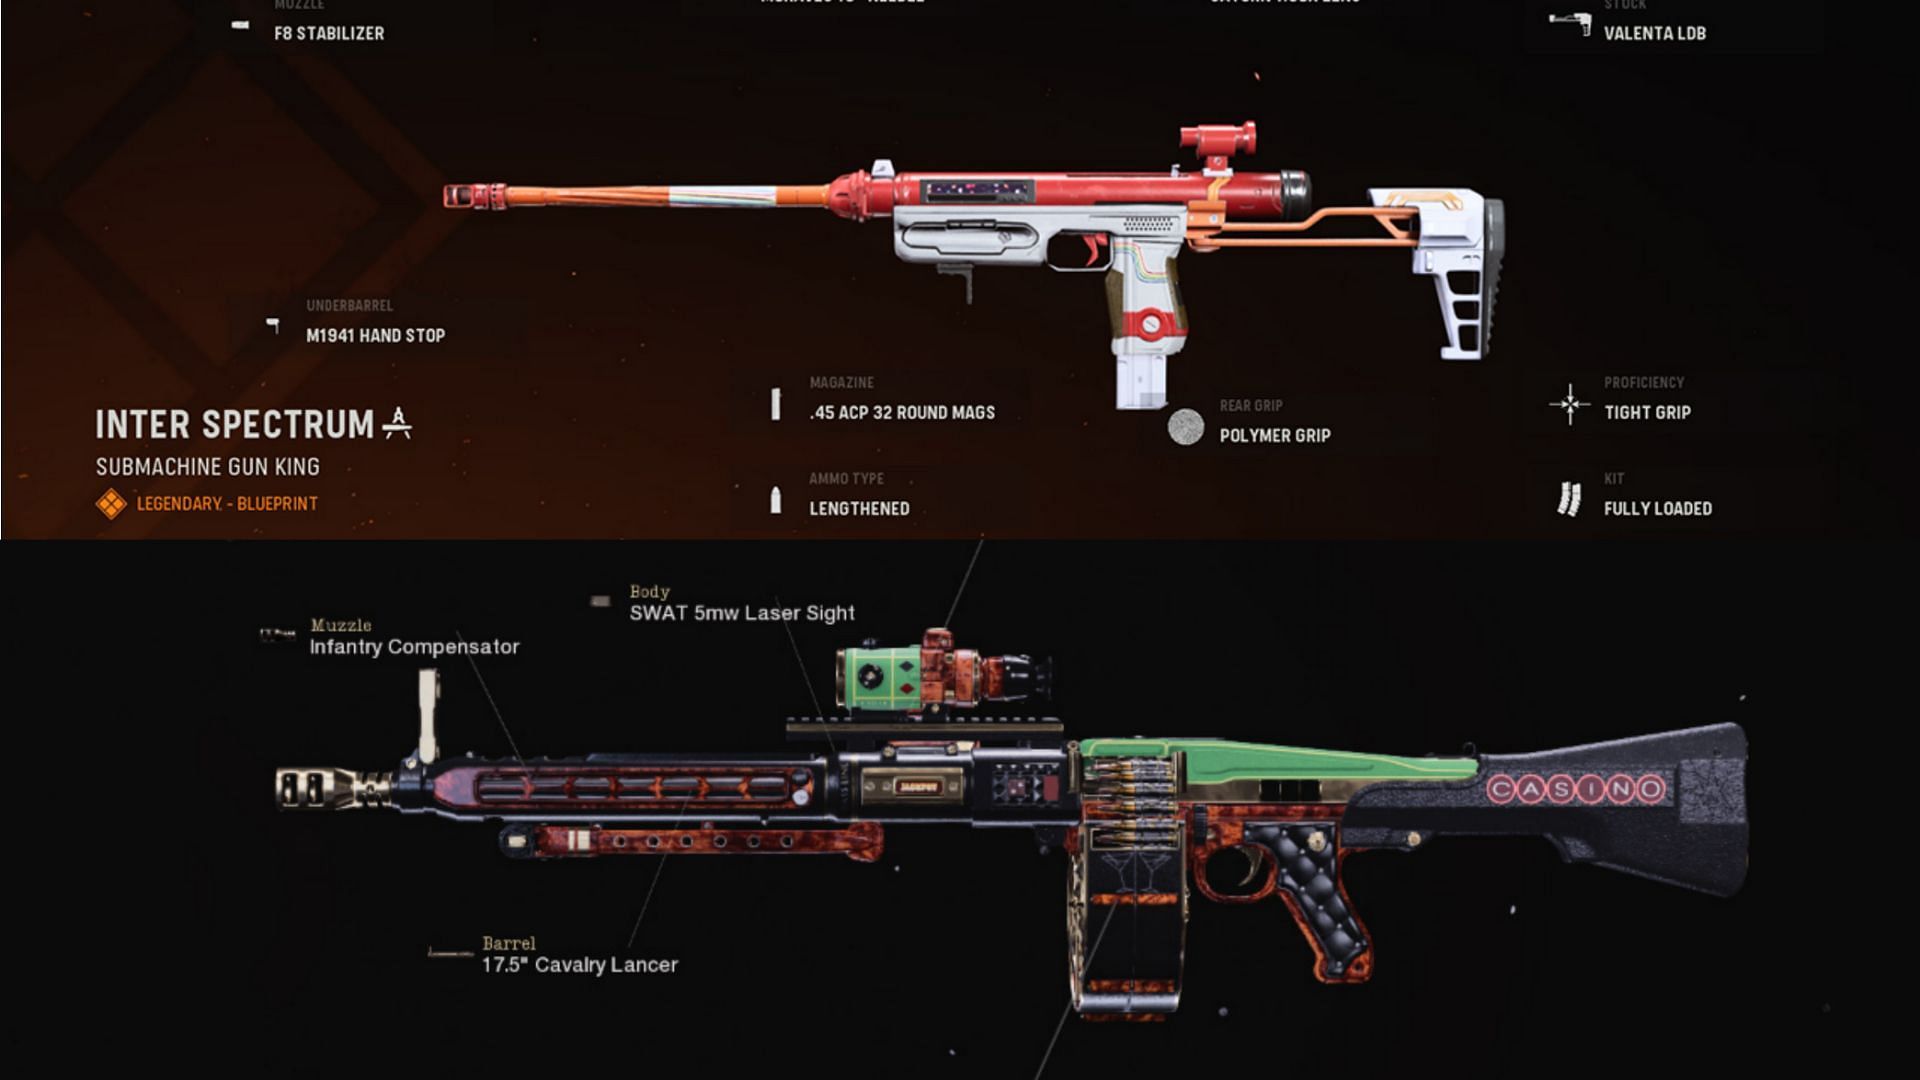 Some available blueprints for RA 225 and MG 82 in-game (Image via Warzone / Activision)